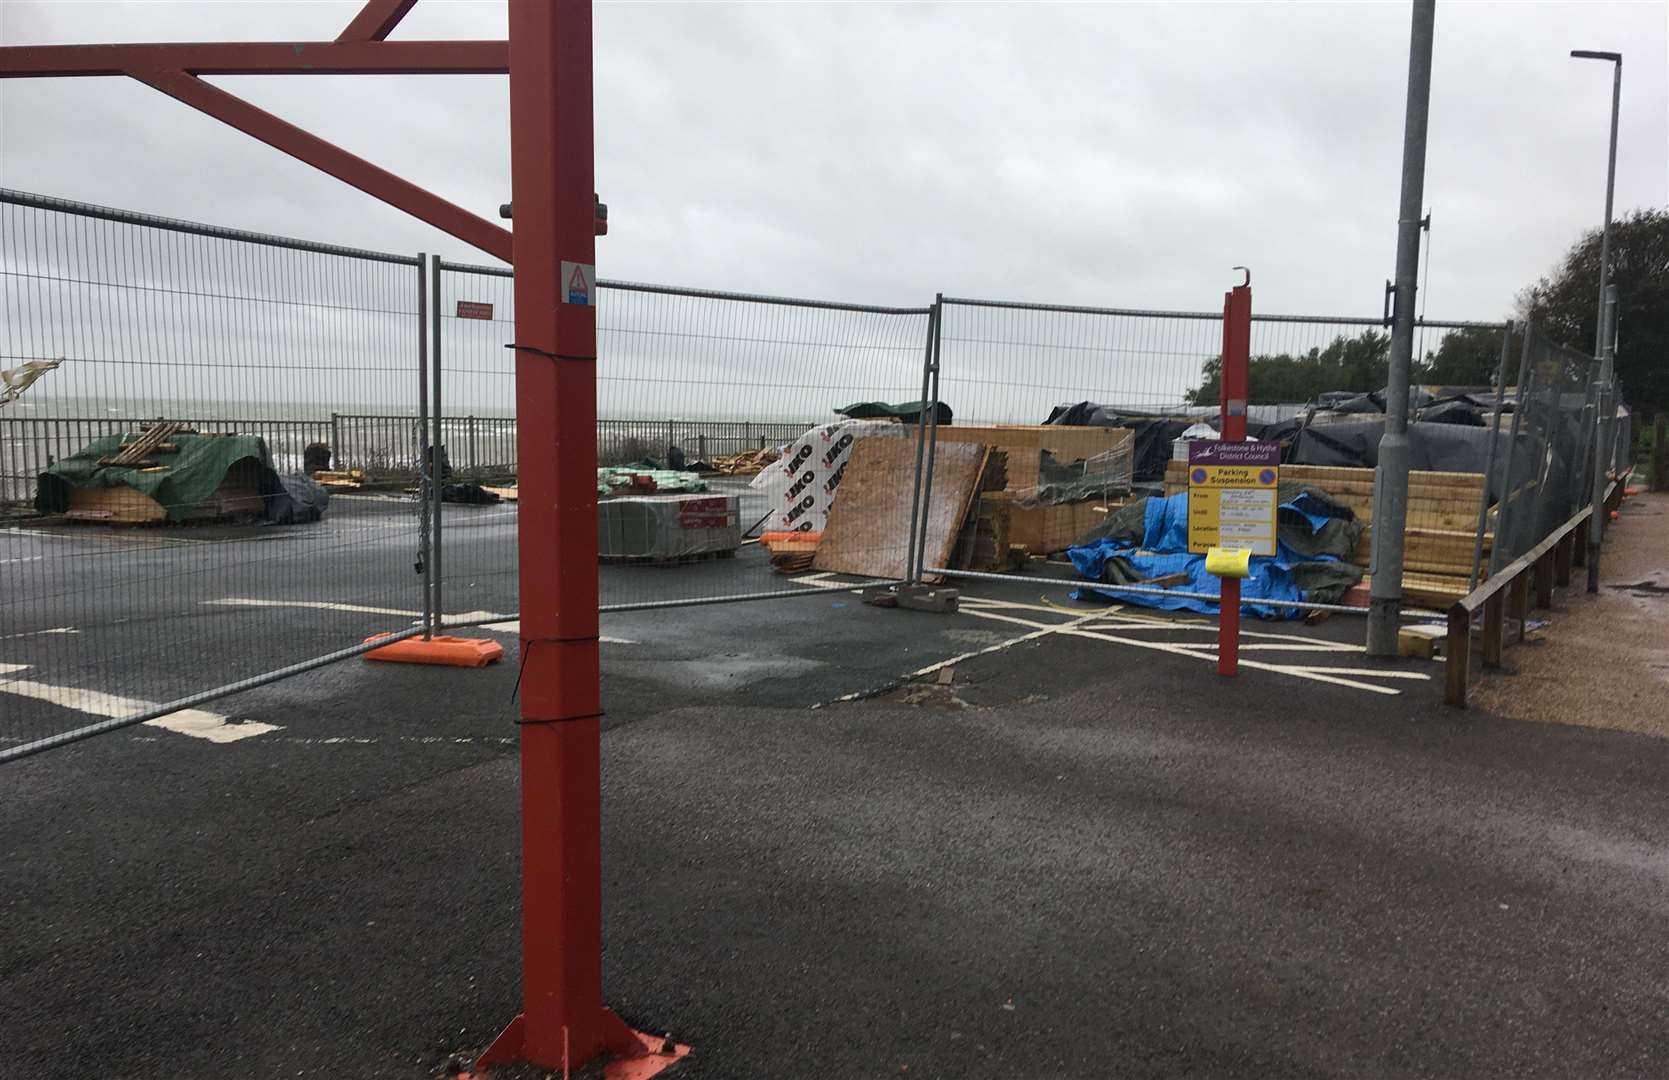 The car park for the Lower Leas Coastal Park has also been shut off. Picture: Cllr Mary Lawes